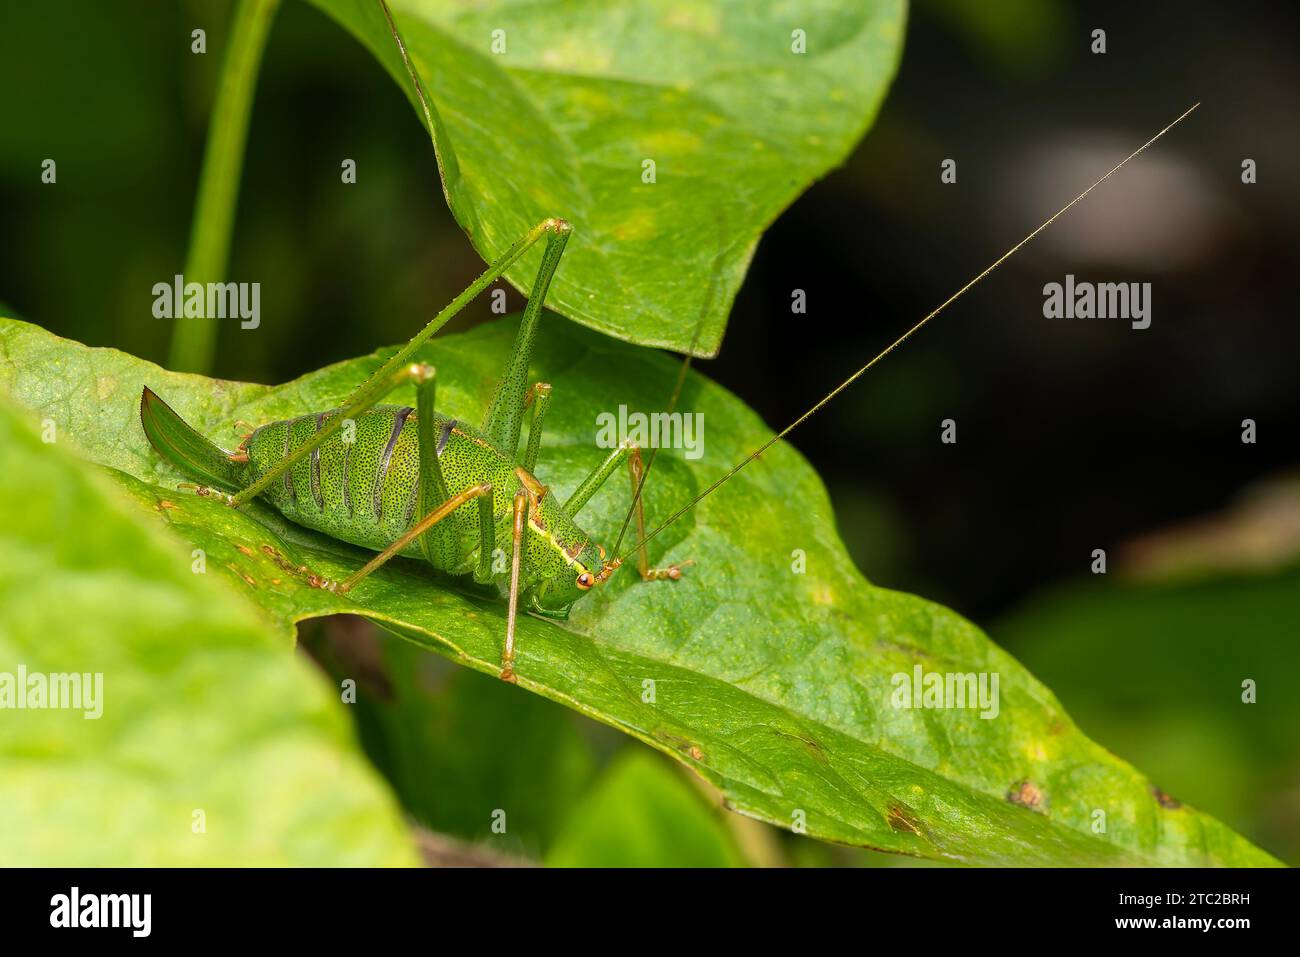 Speckled Bush Cricket, (Leptophynes punctatissima) a common green insect species found in fields meadows and gardens in the UK which is similar to a g Stock Photo